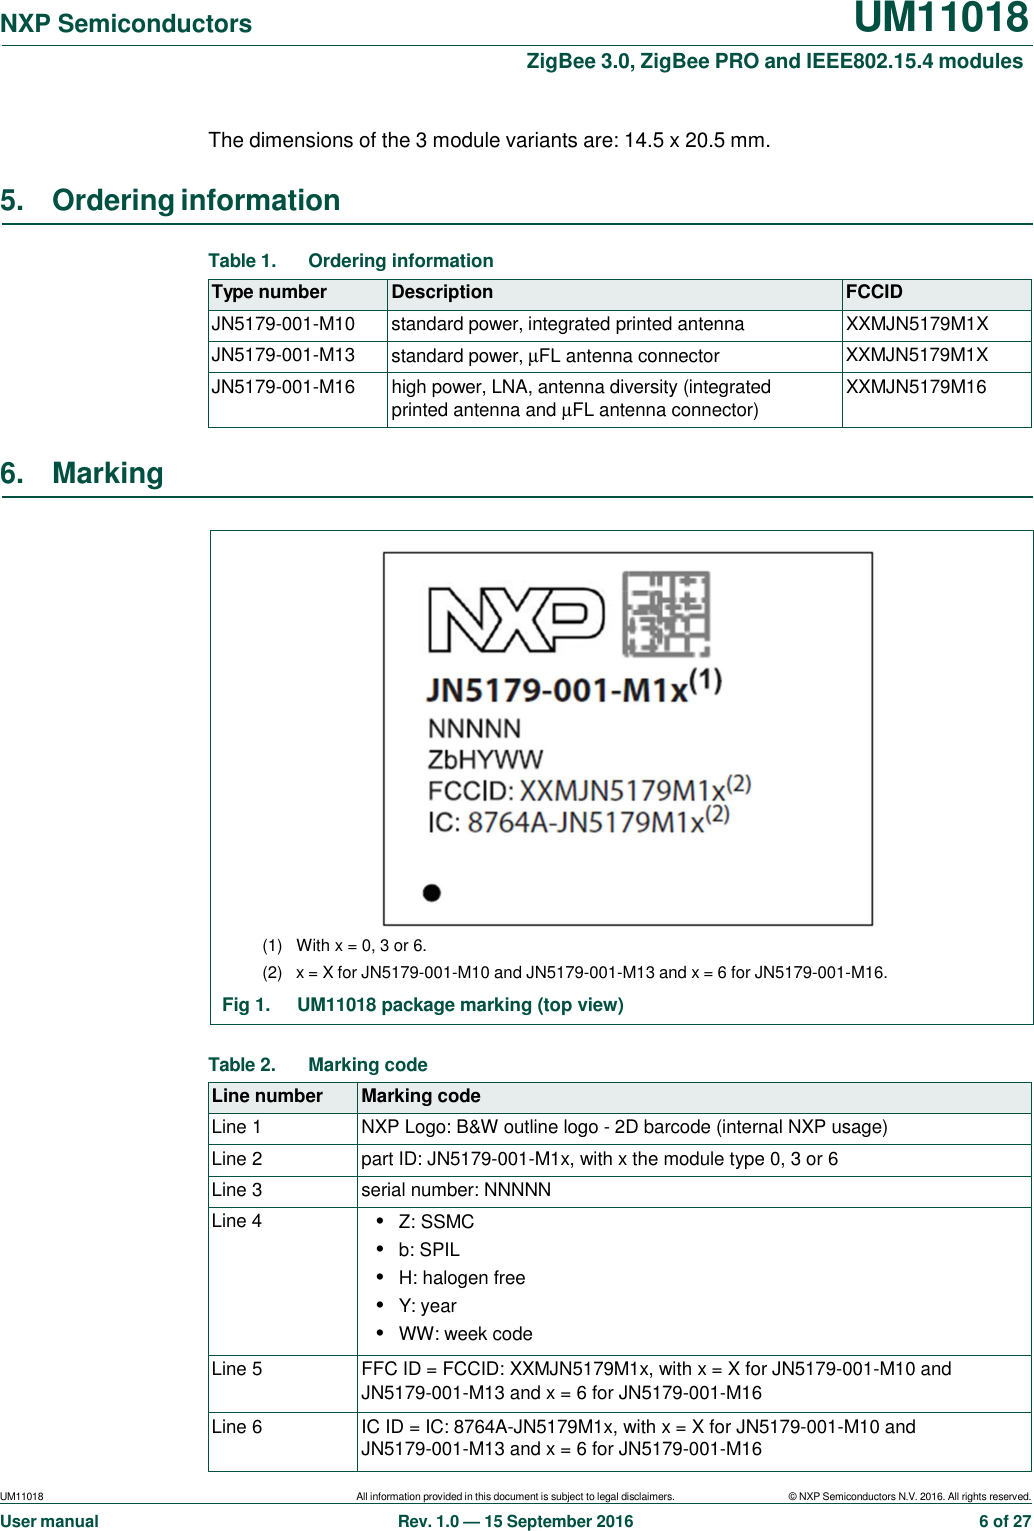 UM11018 NXP Semiconductors UM11018 User manual All information provided in this document is subject to legal disclaimers. Rev. 1.0 — 15 September 2016 © NXP Semiconductors N.V. 2016. All rights reserved. 6 of 27     ZigBee 3.0, ZigBee PRO and IEEE802.15.4 modules   The dimensions of the 3 module variants are: 14.5 x 20.5 mm.  5. Ordering information    Table 1.  Ordering information  Type number Description FCCID JN5179-001-M10  standard power, integrated printed antenna  XXMJN5179M1X JN5179-001-M13  standard power, µFL antenna connector  XXMJN5179M1X JN5179-001-M16  high power, LNA, antenna diversity (integrated printed antenna and µFL antenna connector)  XXMJN5179M16  6. Marking      Table 2.  Marking code  Line number Marking code Line 1  NXP Logo: B&amp;W outline logo - 2D barcode (internal NXP usage) Line 2  part ID: JN5179-001-M1x, with x the module type 0, 3 or 6 Line 3  serial number: NNNNN Line 4 • Z: SSMC • b: SPIL • H: halogen free • Y: year • WW: week code Line 5  FFC ID = FCCID: XXMJN5179M1x, with x = X for JN5179-001-M10 and  JN5179-001-M13 and x = 6 for JN5179-001-M16 Line 6  IC ID = IC: 8764A-JN5179M1x, with x = X for JN5179-001-M10 and JN5179-001-M13 and x = 6 for JN5179-001-M16    JN5179-001-M1x  XXMJN5179M1x(2) 8764A-JN5179M1x(2)                      (1)   With x = 0, 3 or 6. (2)   x = X for JN5179-001-M10 and JN5179-001-M13 and x = 6 for JN5179-001-M16. Fig 1.  UM11018 package marking (top view) 